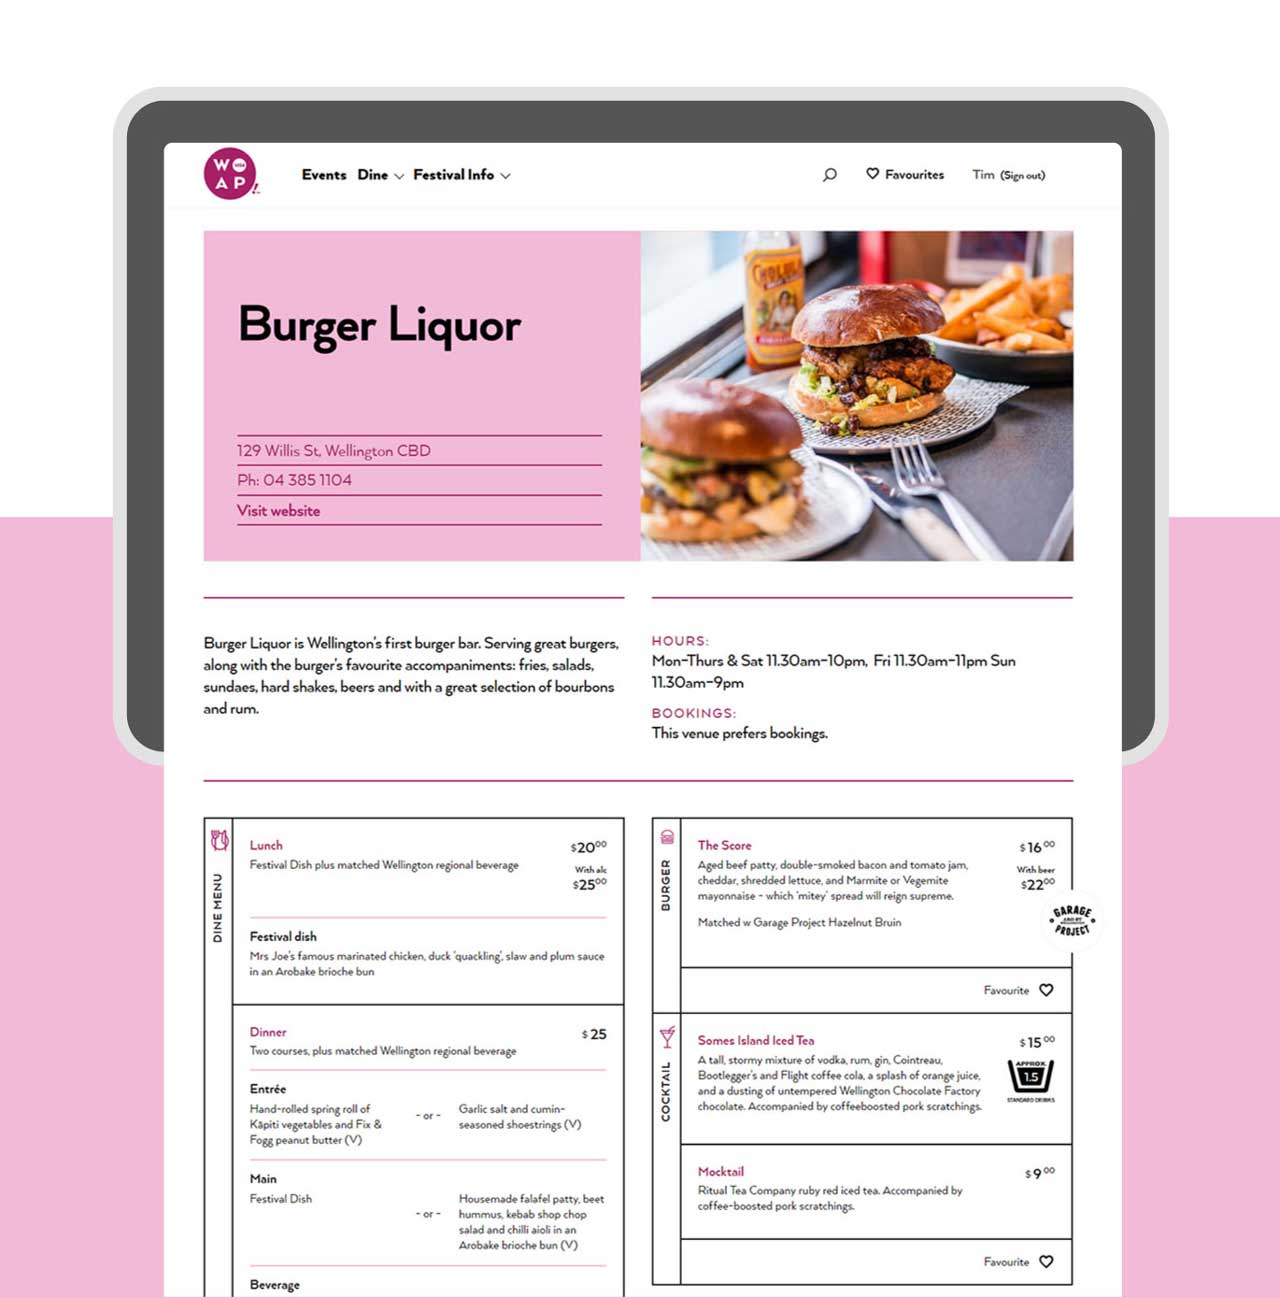 A screenshot of a venue page outlining the restaurant menu